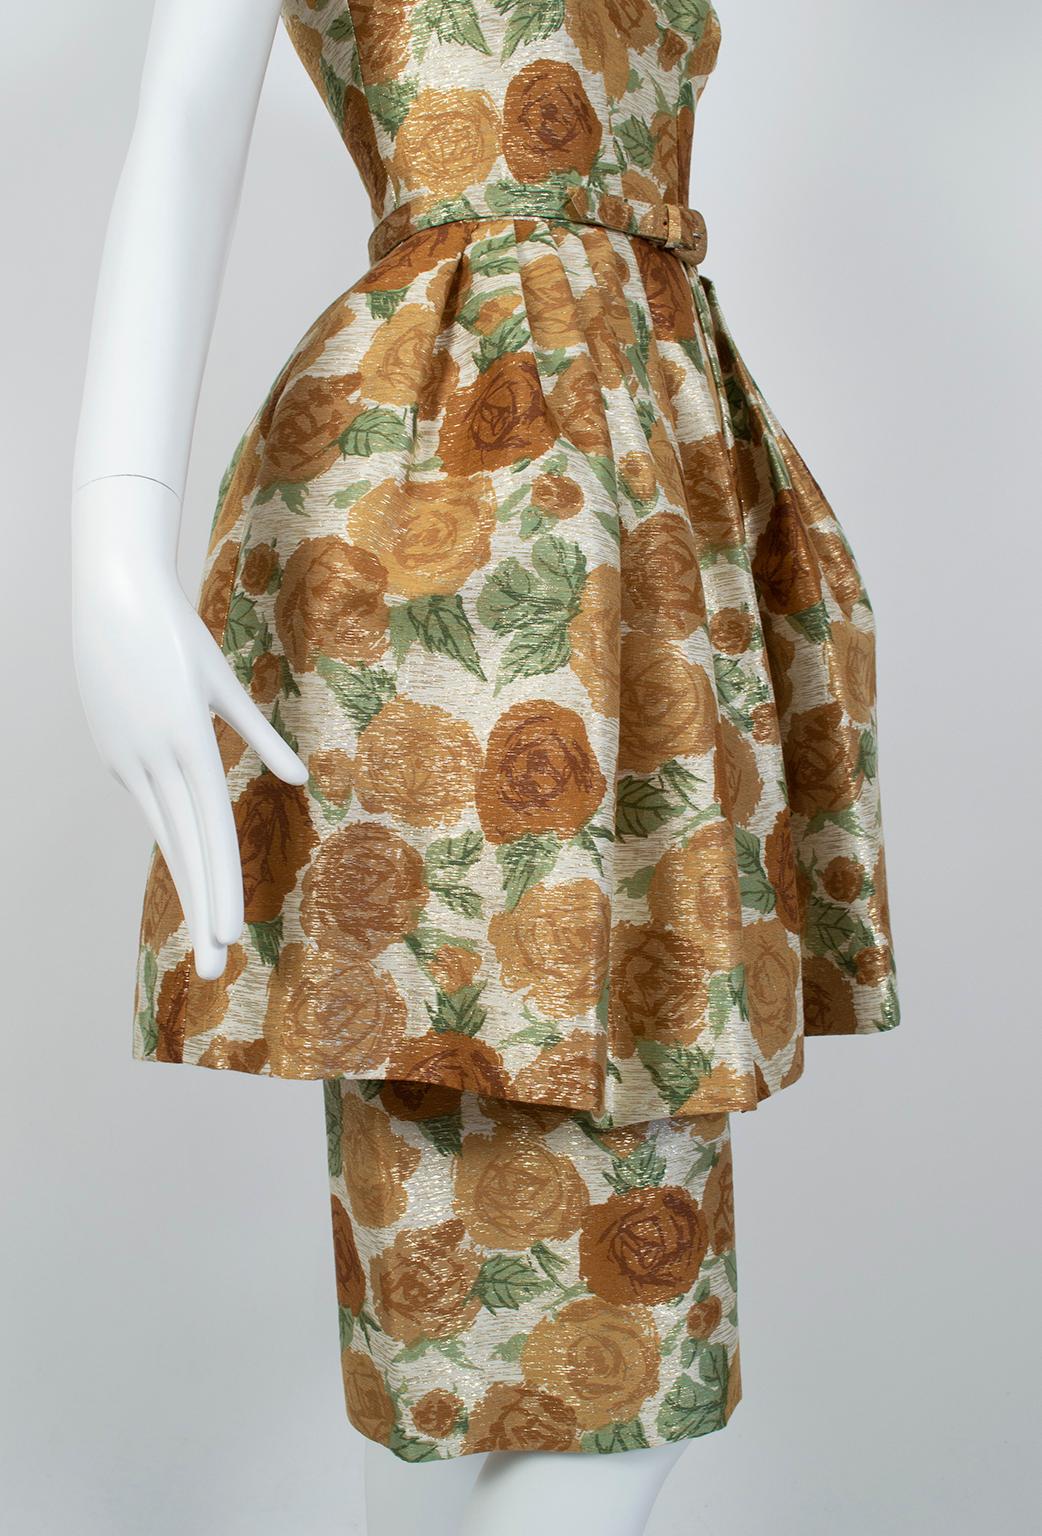 Metallic Green and Gold Floral Cocktail Dress w Lampshade Hobble Skirt- S, 1950s 1